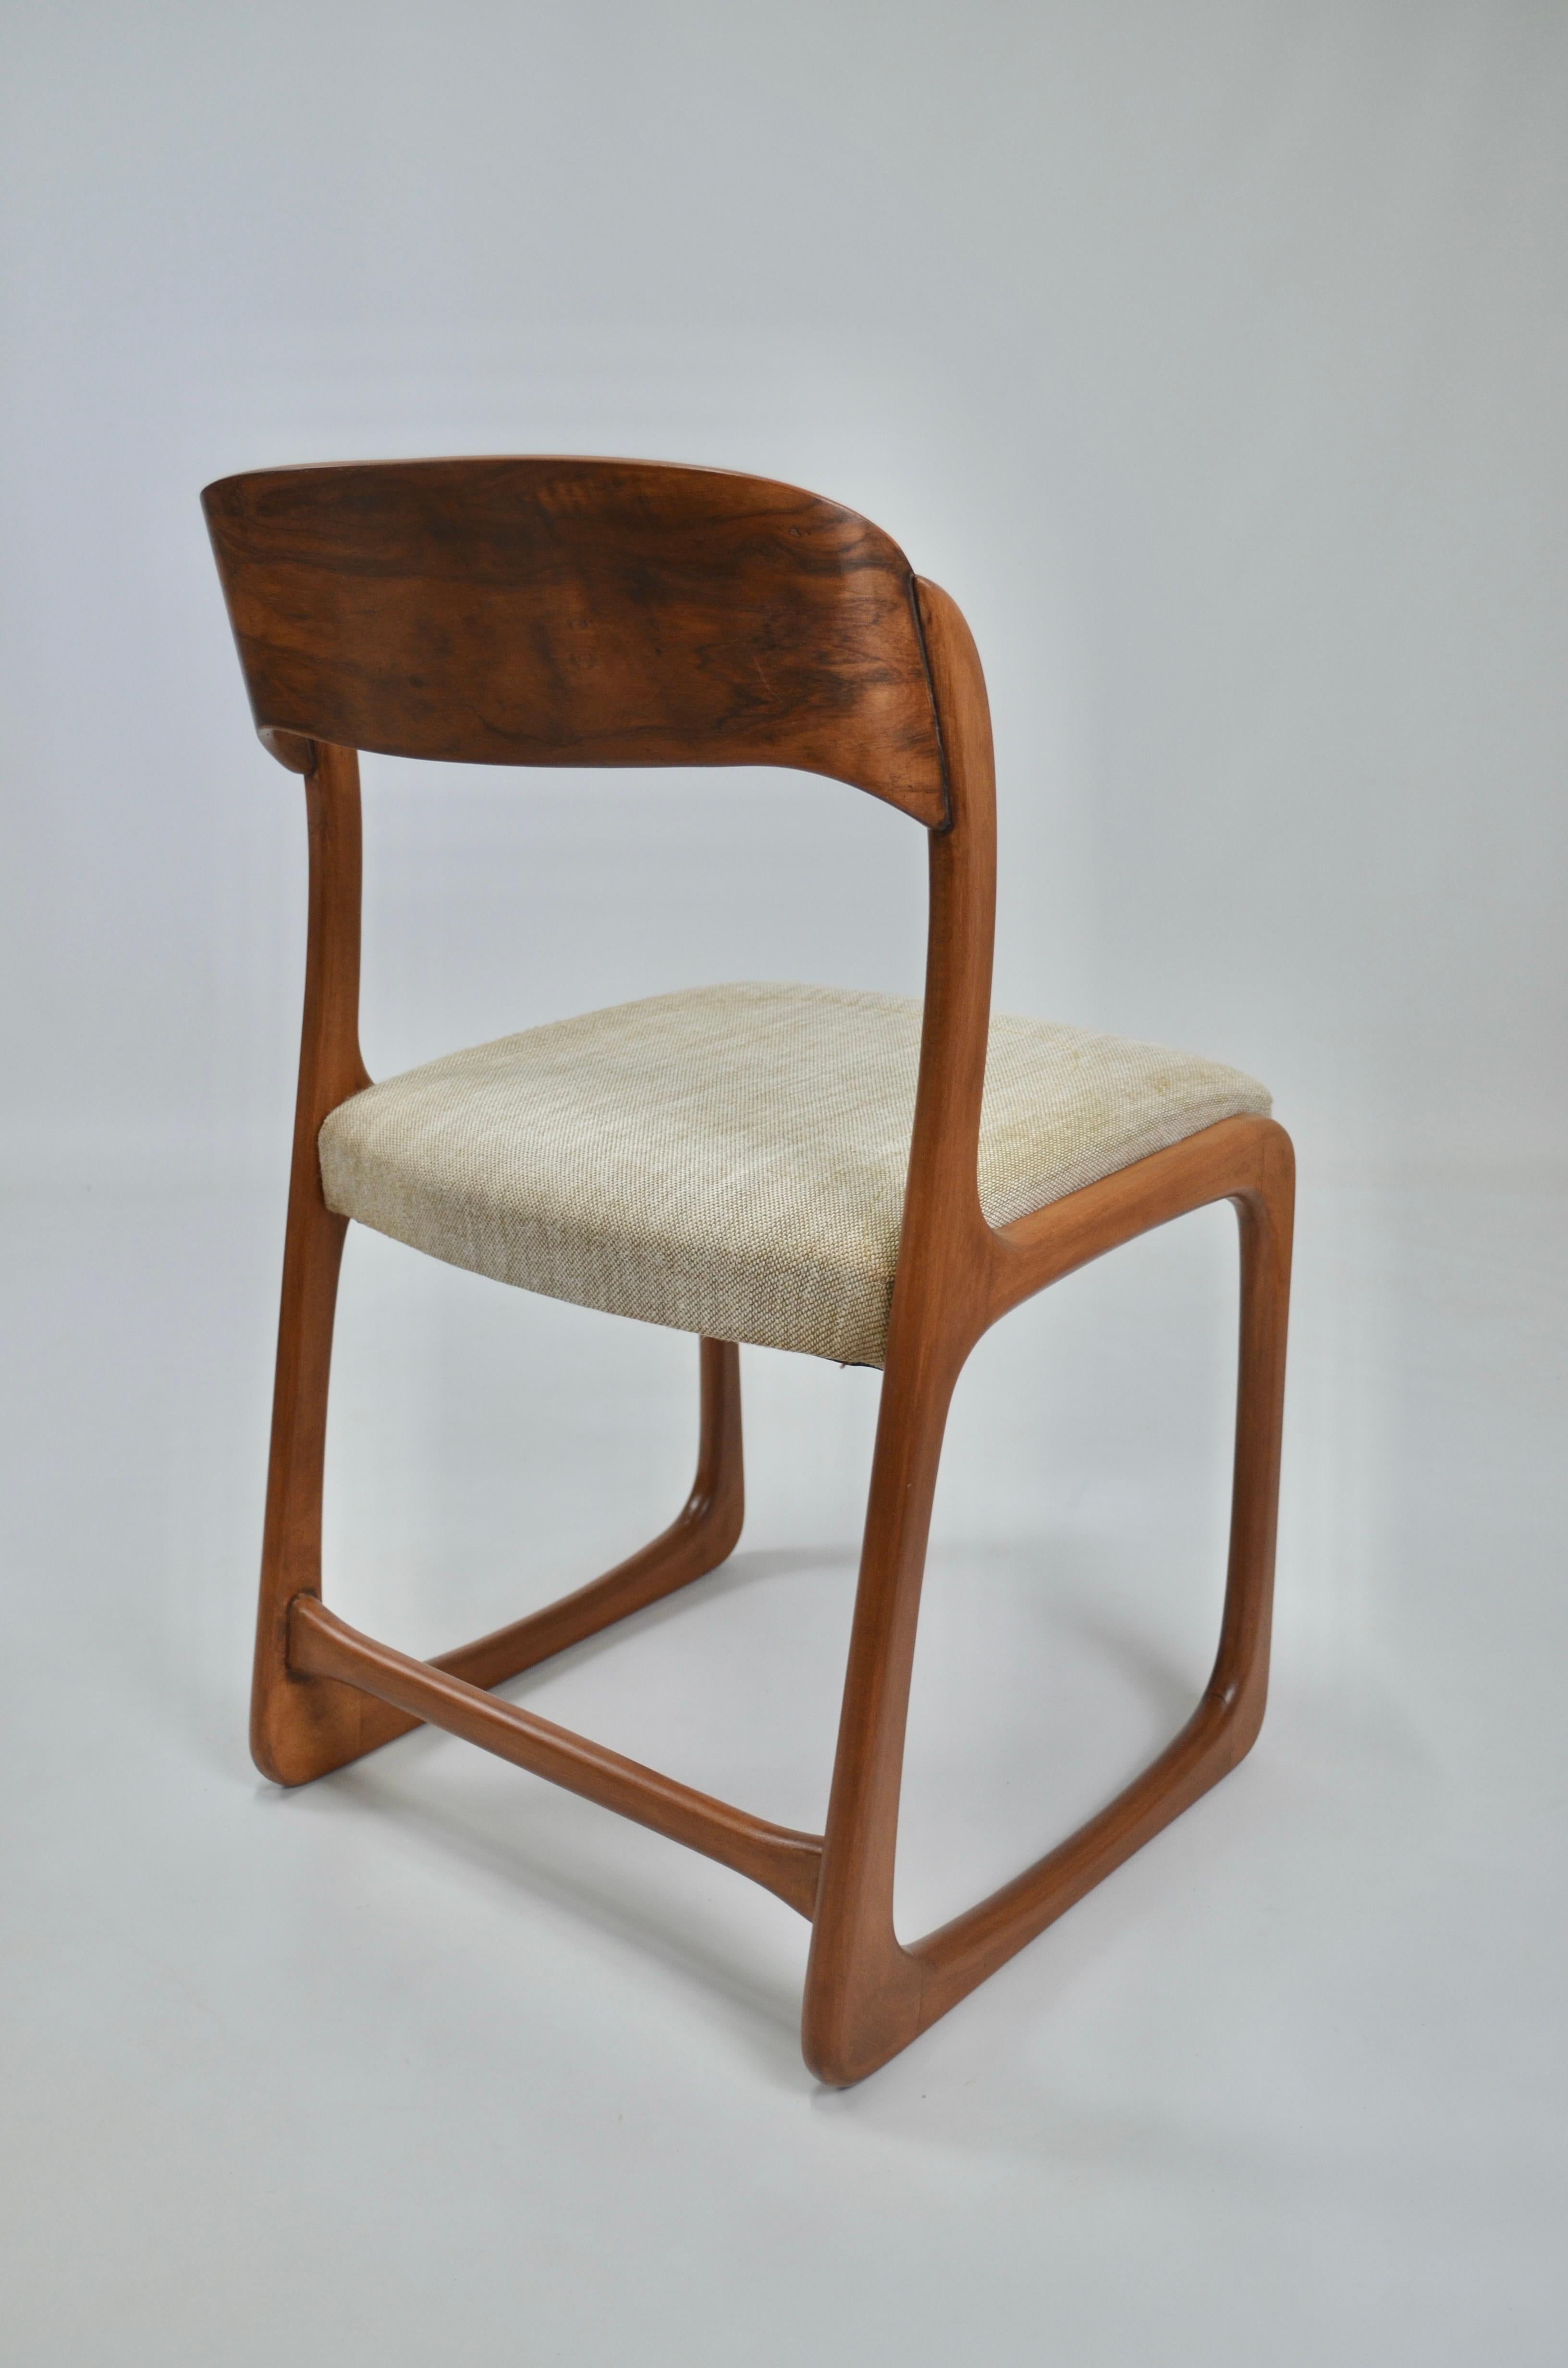 Vintage French Traineau or Sleigh Dining Chairs, Baumann, France, 60s For Sale 12